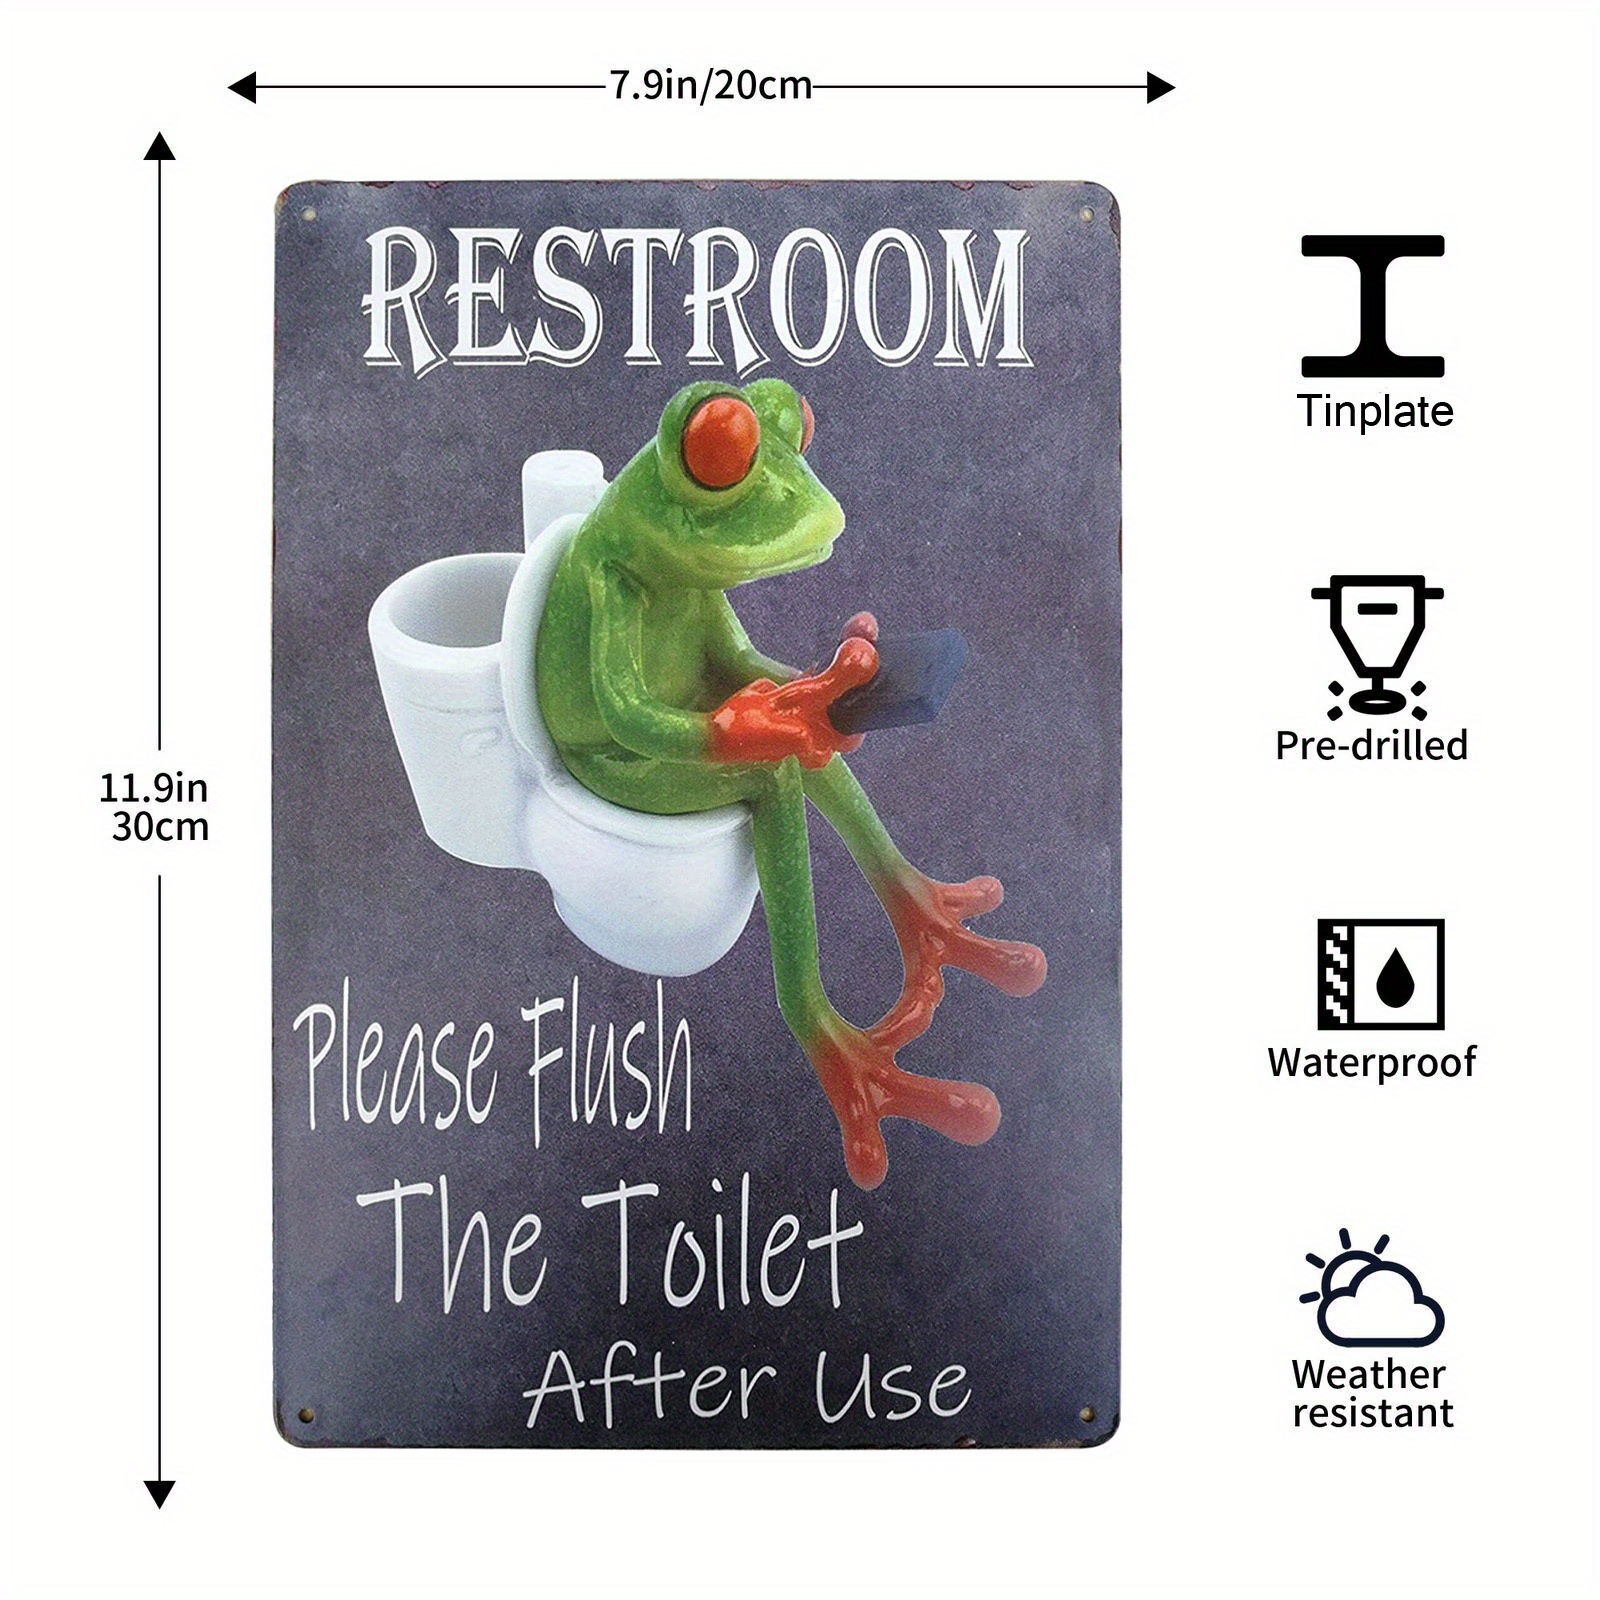 FROG Attention.Changing The Toilet Paper Roll Does Not Cause Brain  Damage BATH Funny 5 x 10 Wall SIGN Bathroom Plaque